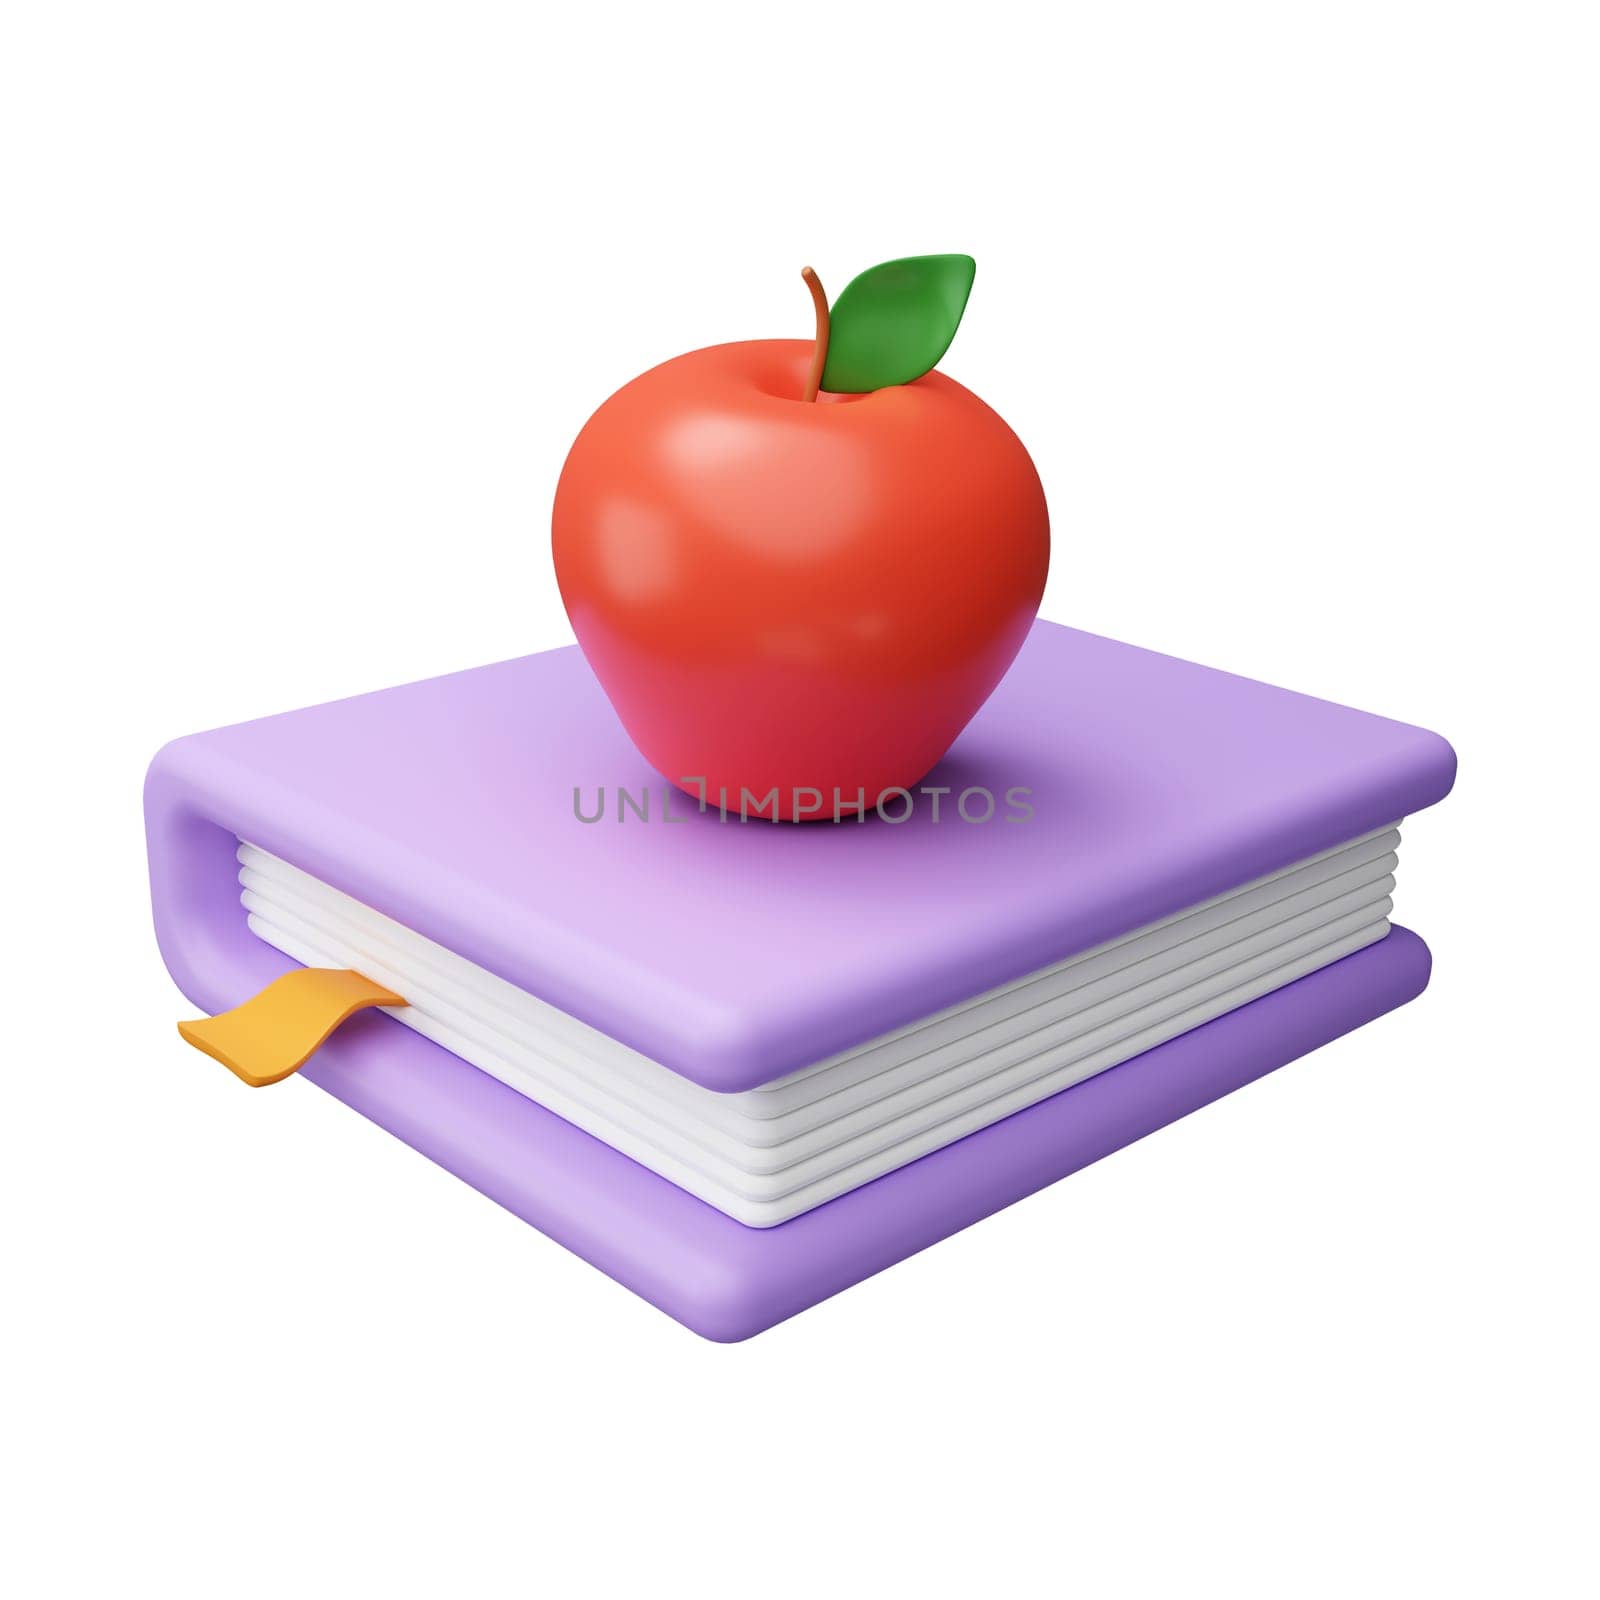 3d Minimal school icon concept, Apple on a stack of books. icon isolated on background, icon symbol clipping path. 3d render illustration by meepiangraphic